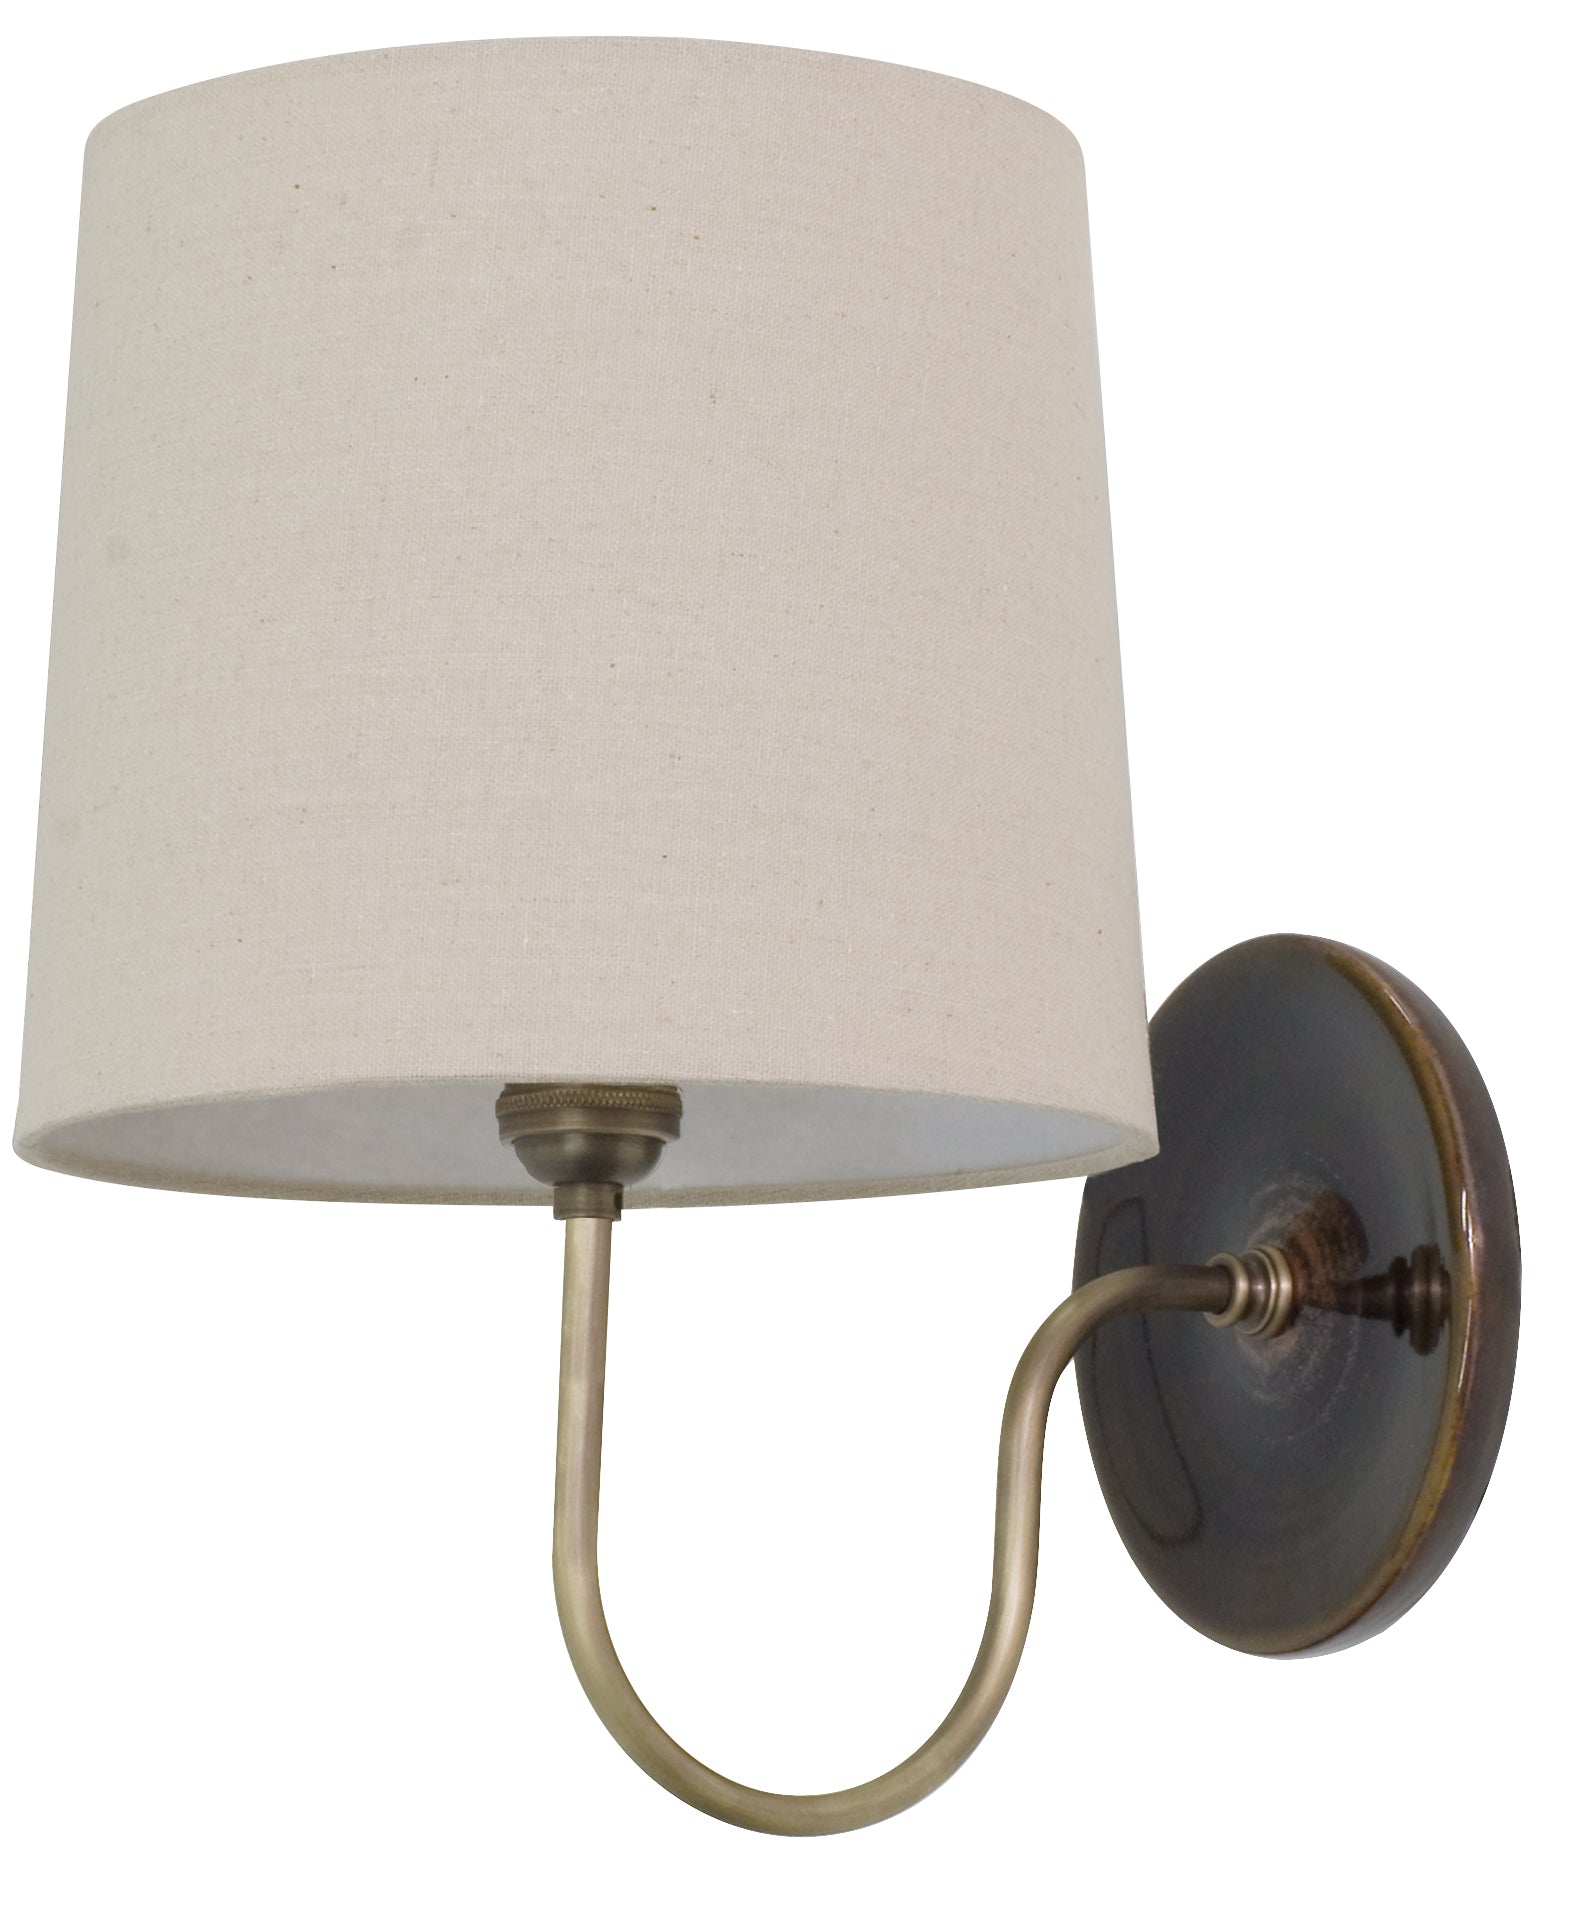 House of Troy Scatchard Wall Lamp Brown Gloss GS725-BR